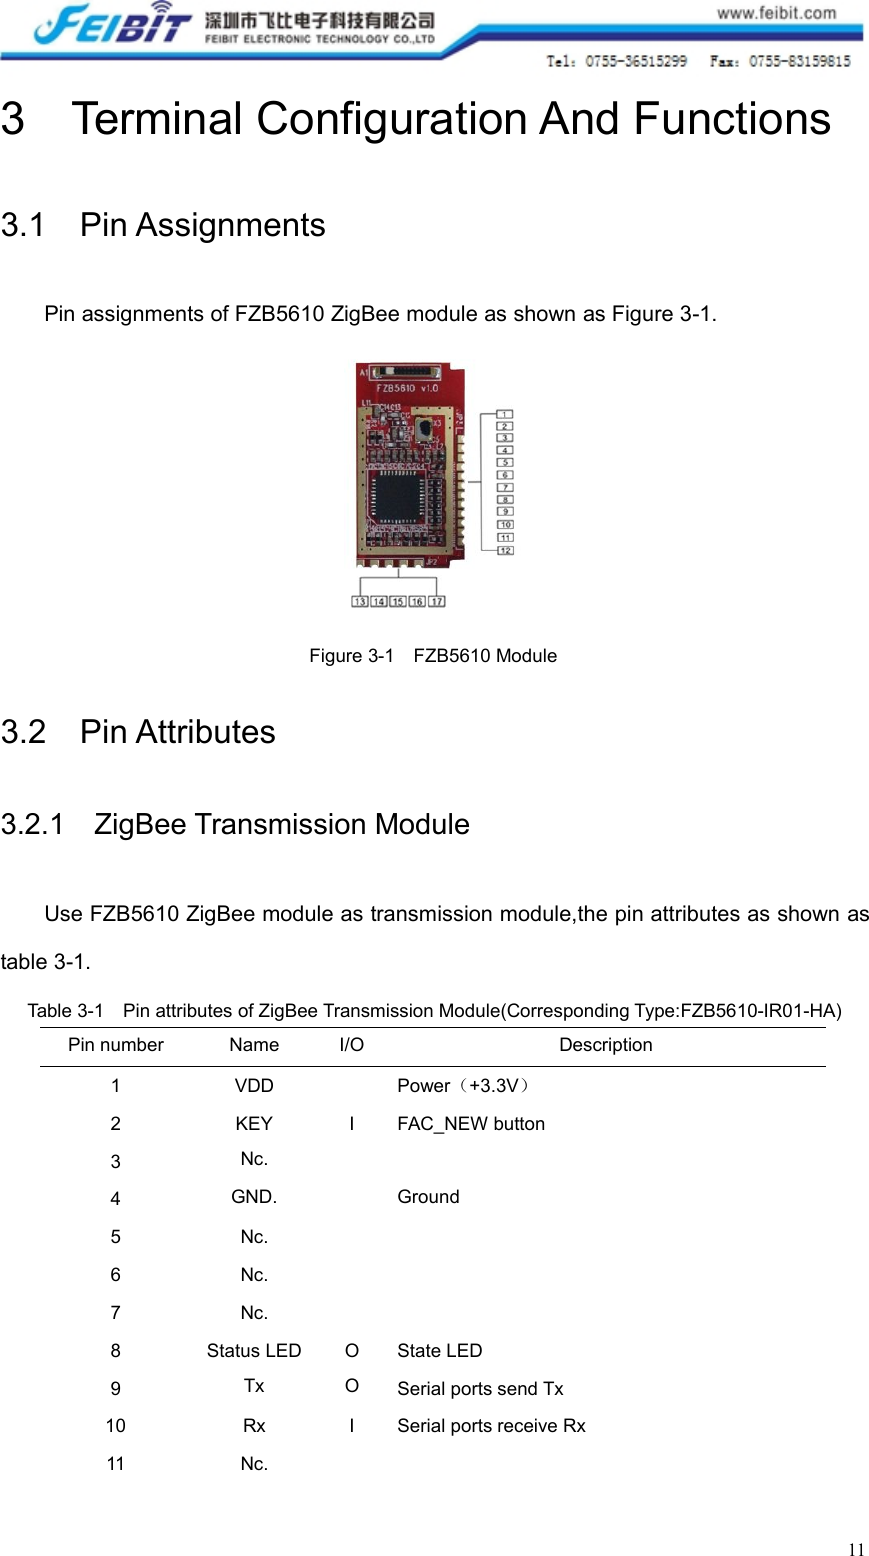 113 Terminal Configuration And Functions3.1 Pin AssignmentsPin assignments of FZB5610 ZigBee module as shown as Figure 3-1.Figure 3-1 FZB5610 Module3.2 Pin Attributes3.2.1 ZigBee Transmission ModuleUse FZB5610 ZigBee module as transmission module,the pin attributes as shown astable 3-1.Table 3-1 Pin attributes of ZigBee Transmission Module(Corresponding Type:FZB5610-IR01-HA)Pin numberNameI/ODescription1VDDPower（+3.3V）2KEYIFAC_NEW button3Nc.4GND.Ground5Nc.6Nc.7Nc.8Status LEDOState LED9TxOSerial ports send Tx10RxISerial ports receive Rx11Nc.